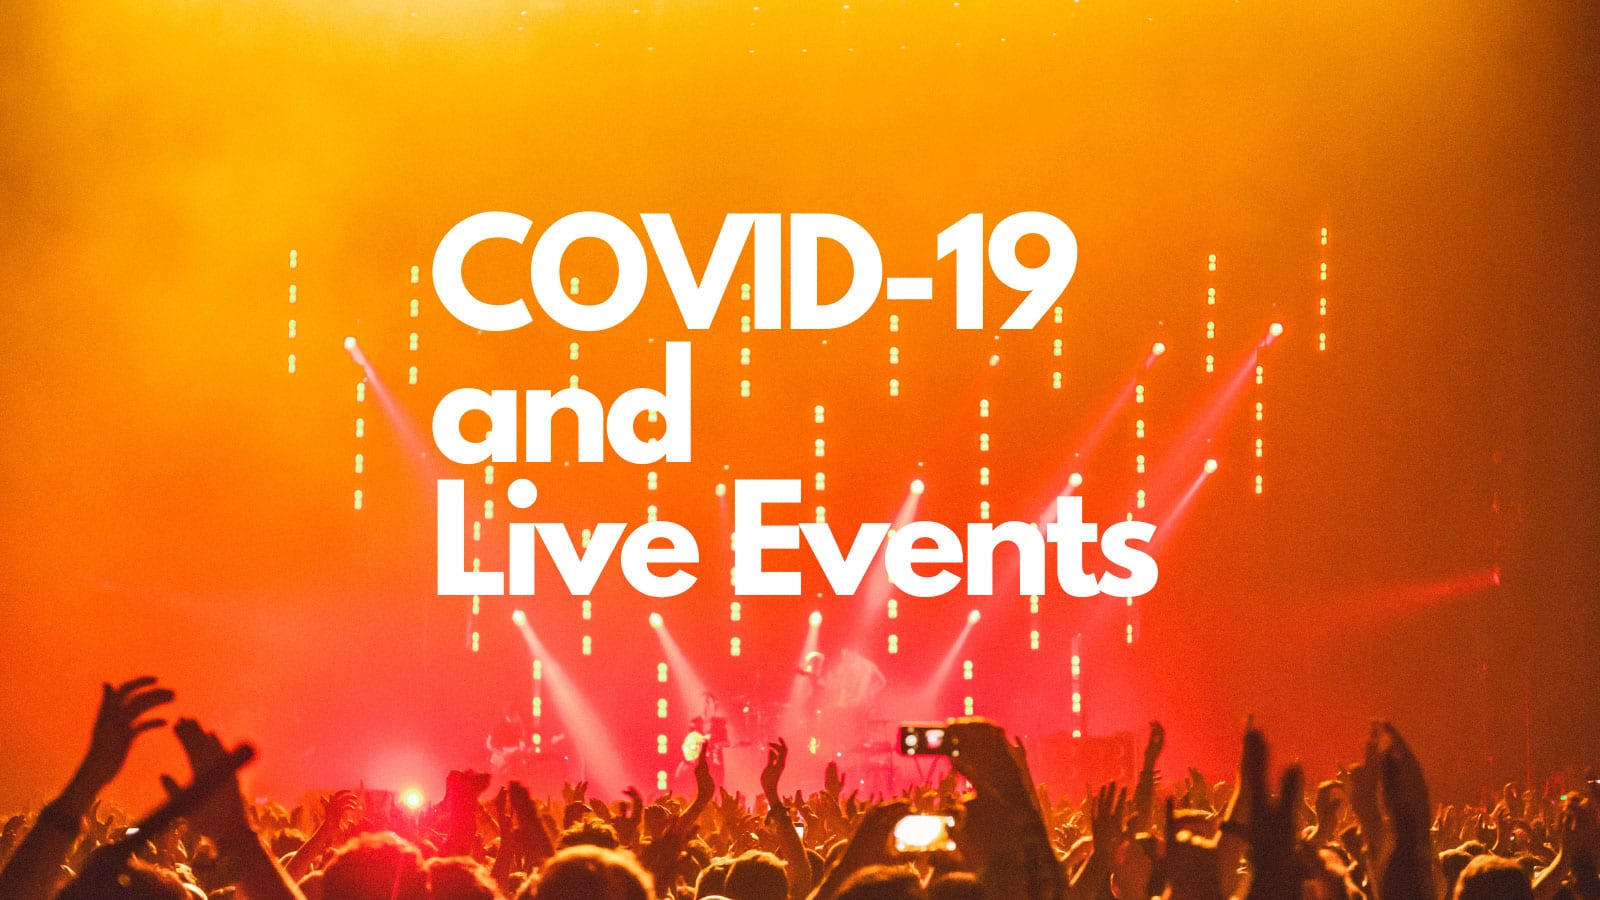 COVID-19 and live events banner